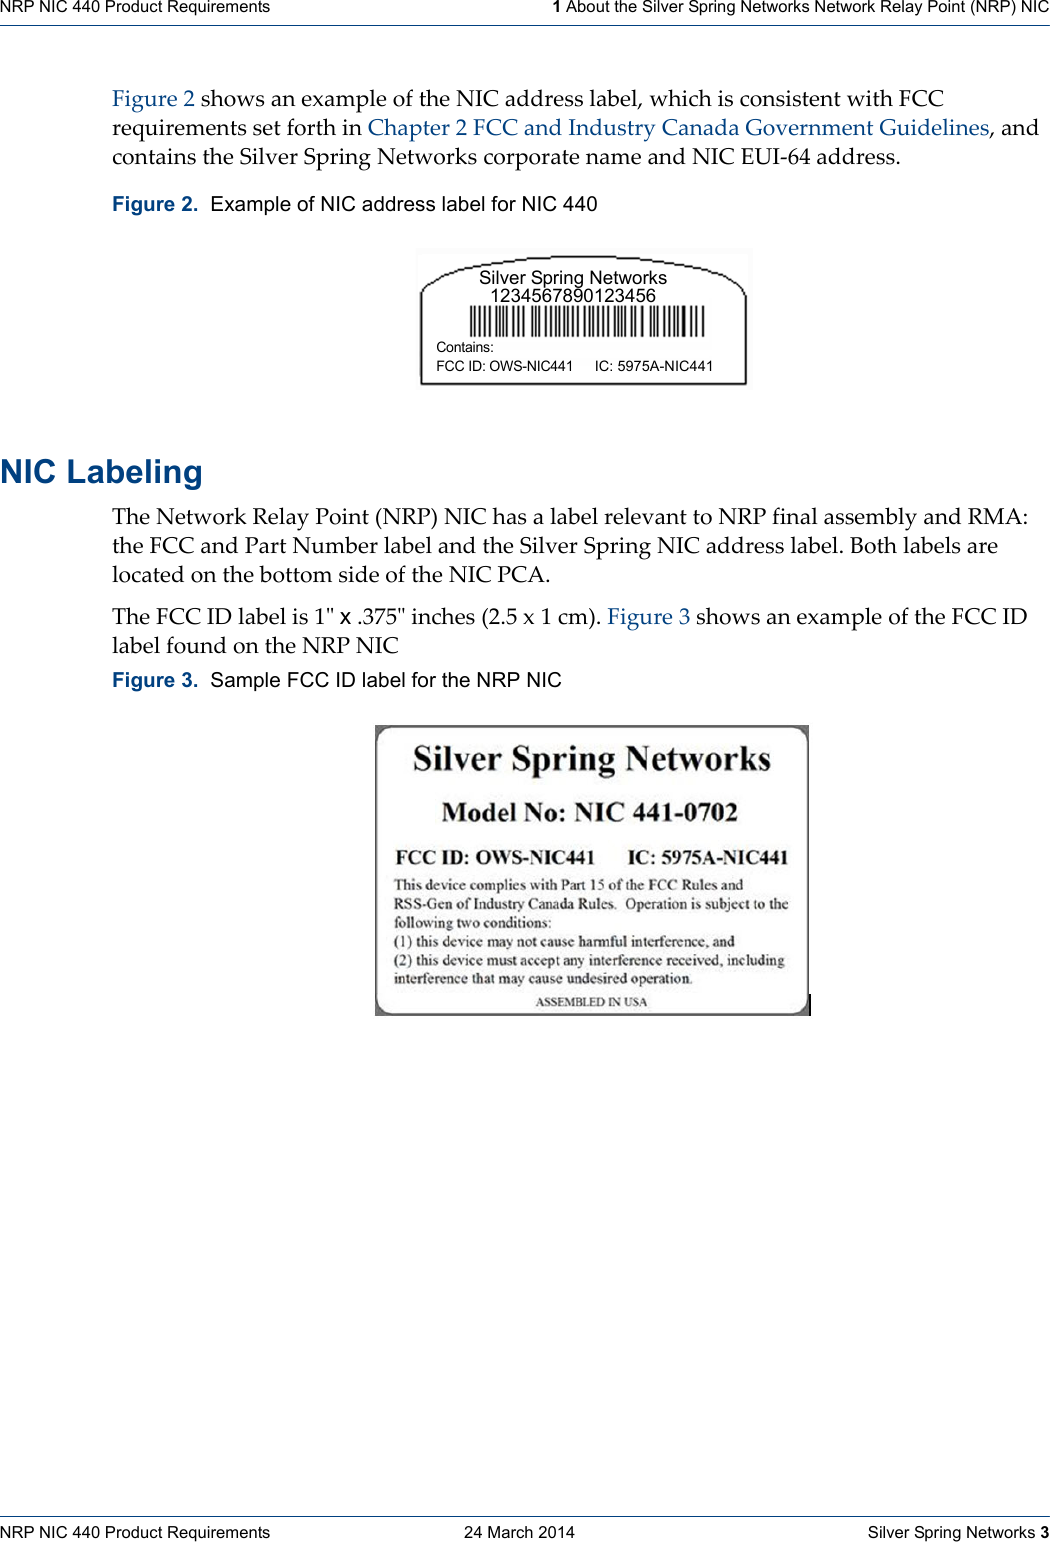 NRP NIC 440 Product Requirements    24 March 2014    Silver Spring Networks 3NRP NIC 440 Product Requirements   1 About the Silver Spring Networks Network Relay Point (NRP) NICFigure2showsanexampleoftheNICaddresslabel,whichisconsistentwithFCCrequirementssetforthinChapter2FCCandIndustryCanadaGovernmentGuidelines,andcontainstheSilverSpringNetworkscorporatenameandNICEUI‐64address.NIC Labeling TheNetworkRelayPoint(NRP)NIChasalabelrelevanttoNRPfinalassemblyandRMA:theFCCandPartNumberlabelandtheSilverSpringNICaddresslabel.BothlabelsarelocatedonthebottomsideoftheNICPCA.TheFCCIDlabelis1ʺx.375ʺinches(2.5x1cm).Figure3showsanexampleoftheFCCIDlabelfoundontheNRPNICFigure 2.  Example of NIC address label for NIC 440Figure 3.  Sample FCC ID label for the NRP NICSilver Spring Networks1234567890123456Contains: FCC ID: OWS-NIC441IC: 5975A-NIC441